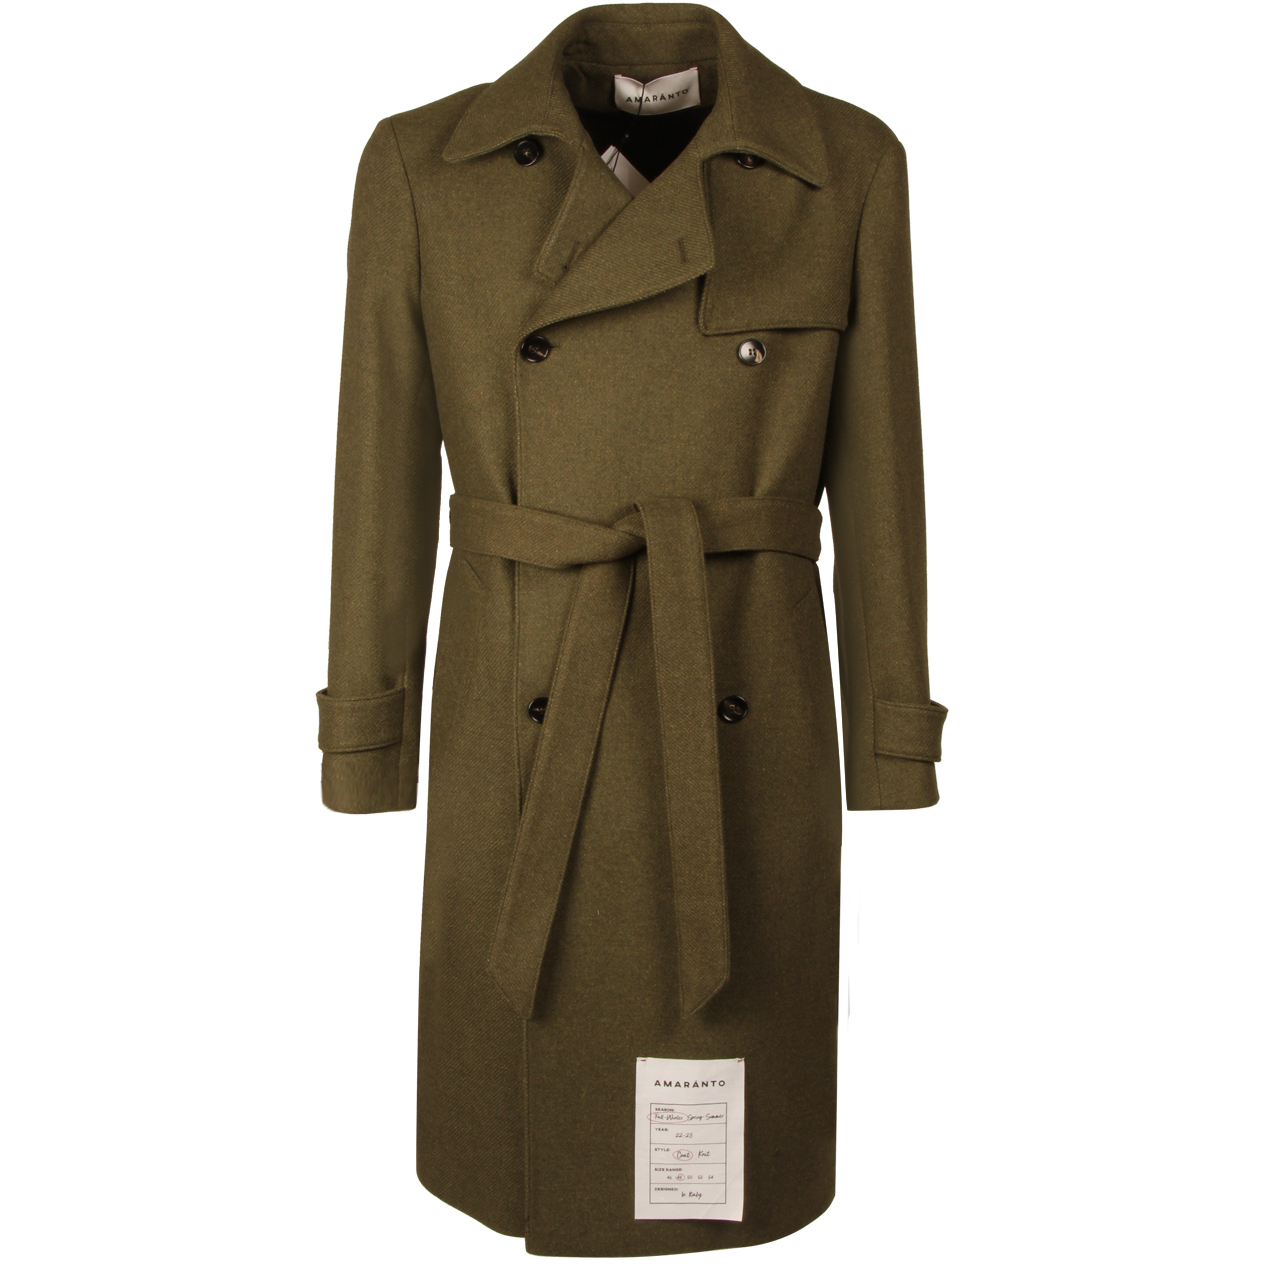 AMARANTO OUTDOOR DOUBLE-BREASTED TRENCH COAT Man Military